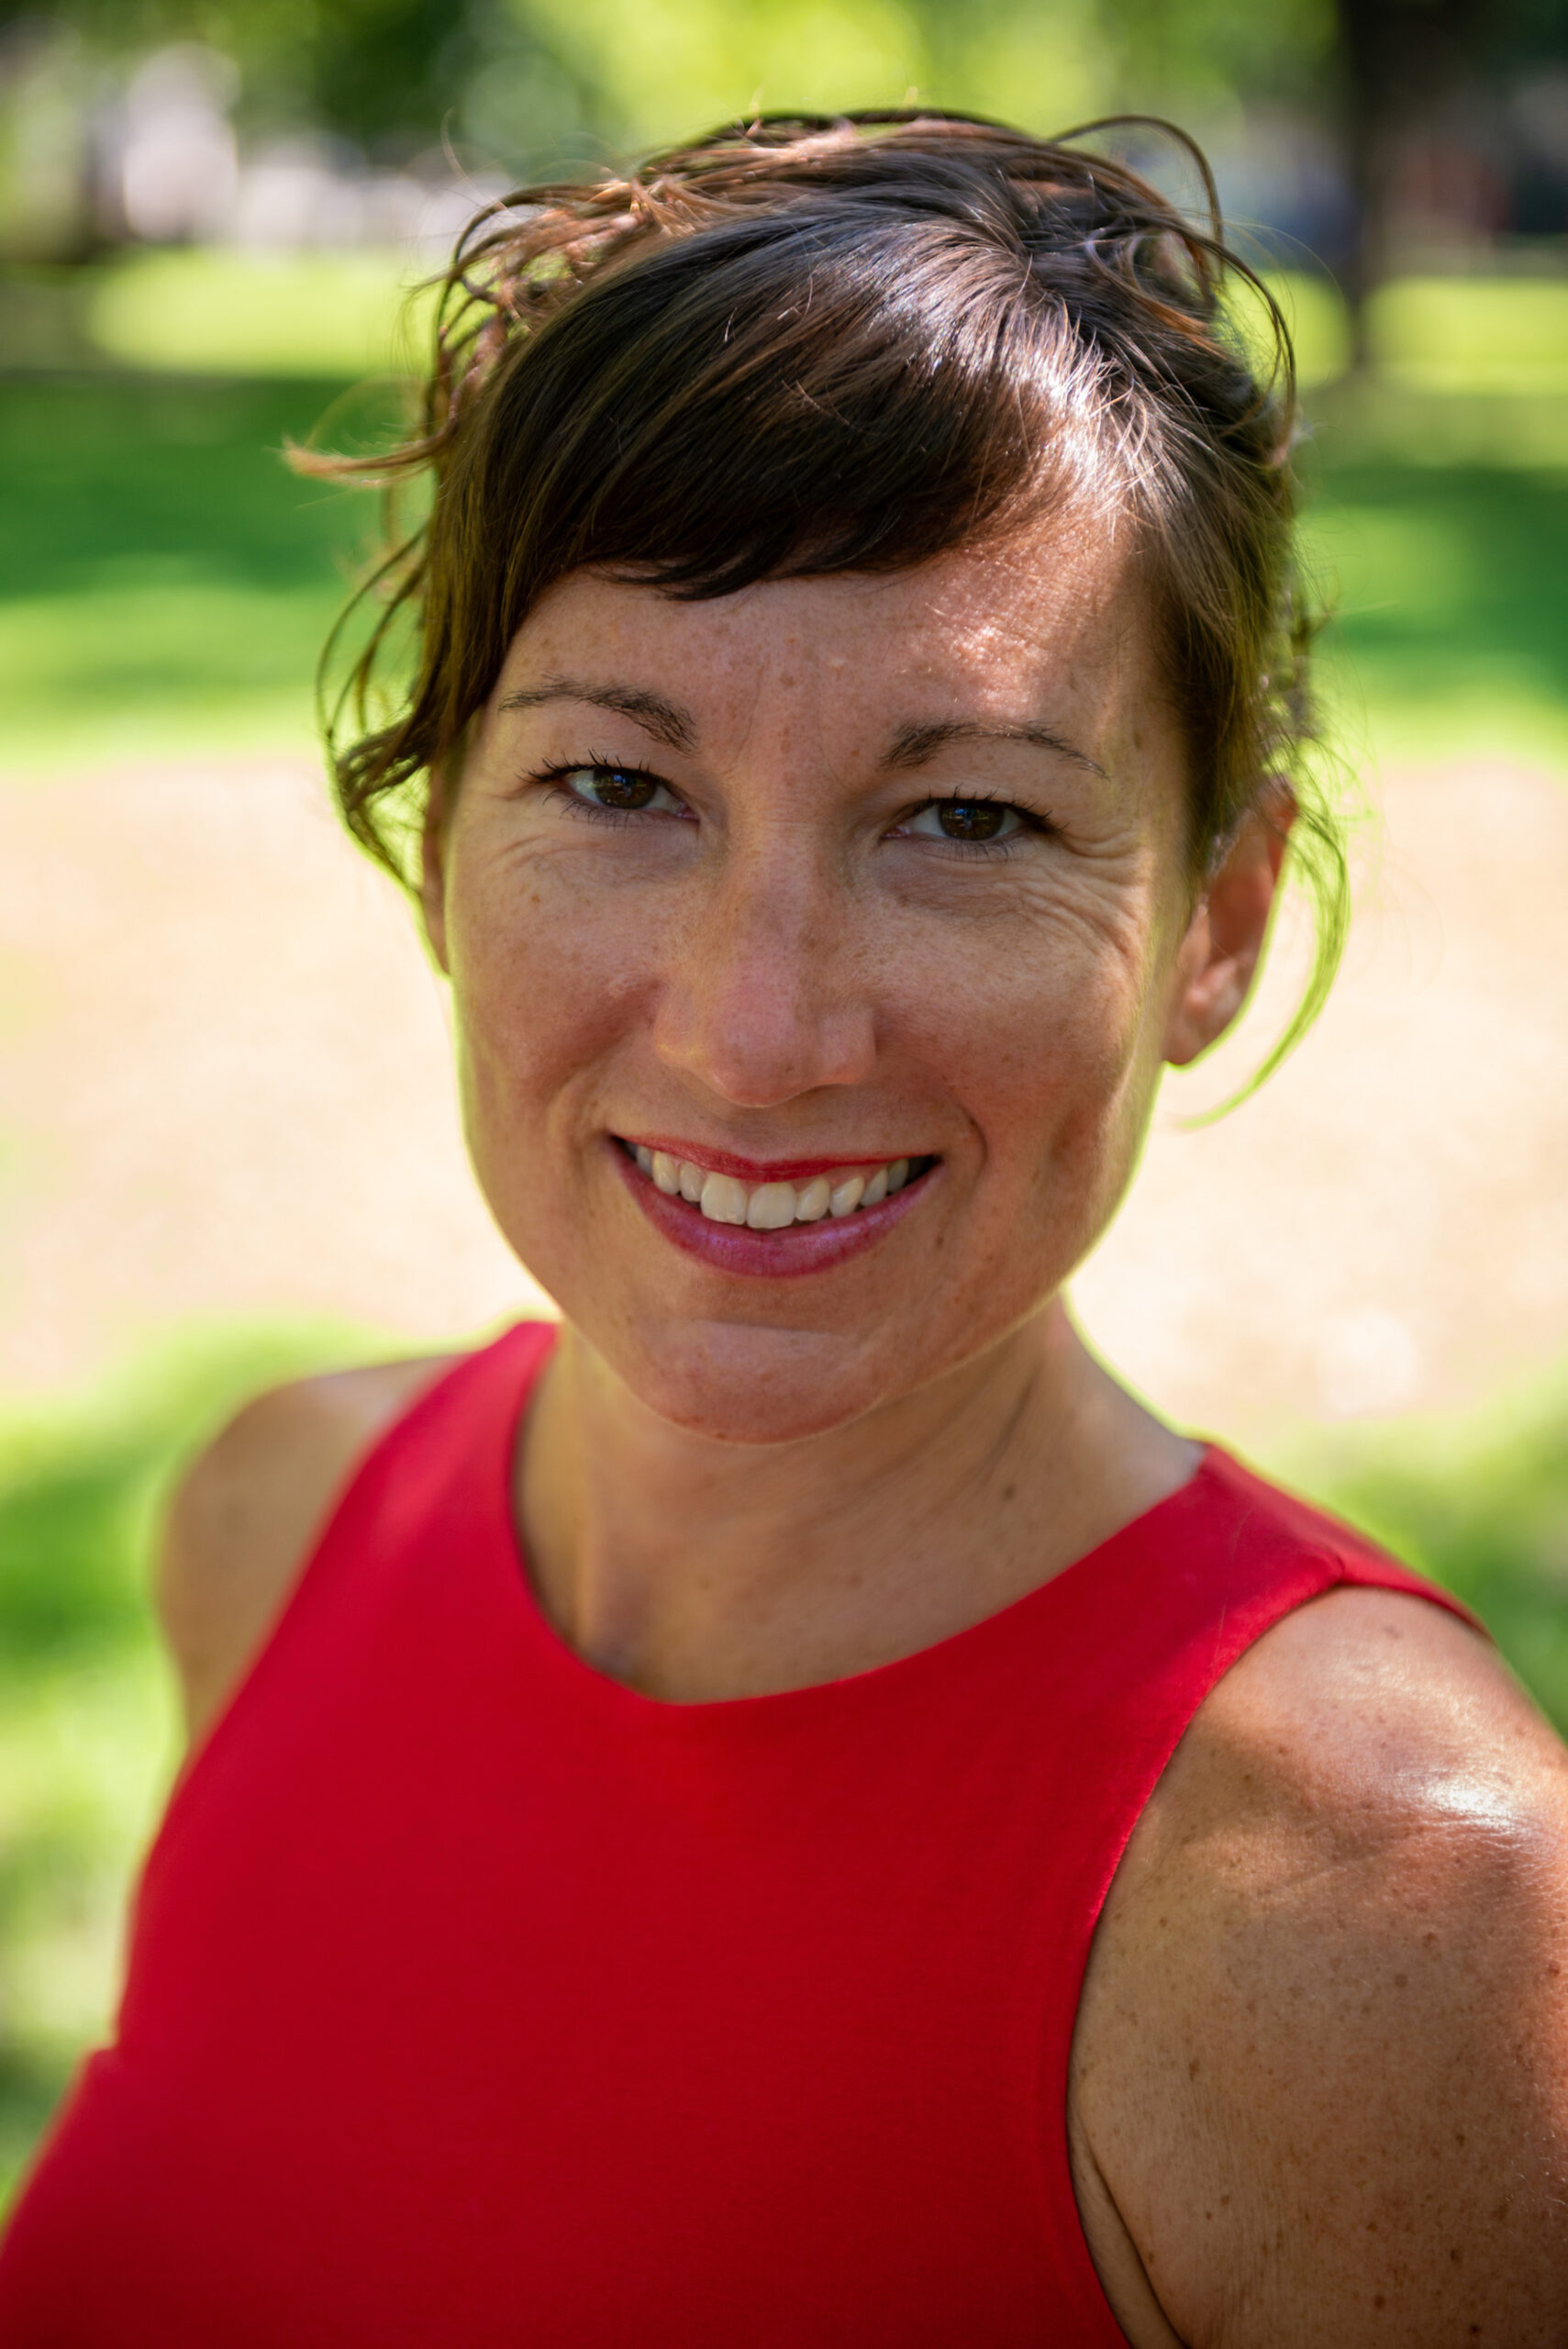 Image of Julie Labelle, osteopath, trainer, Pilates instructor, and massage therapist specializing in posture.